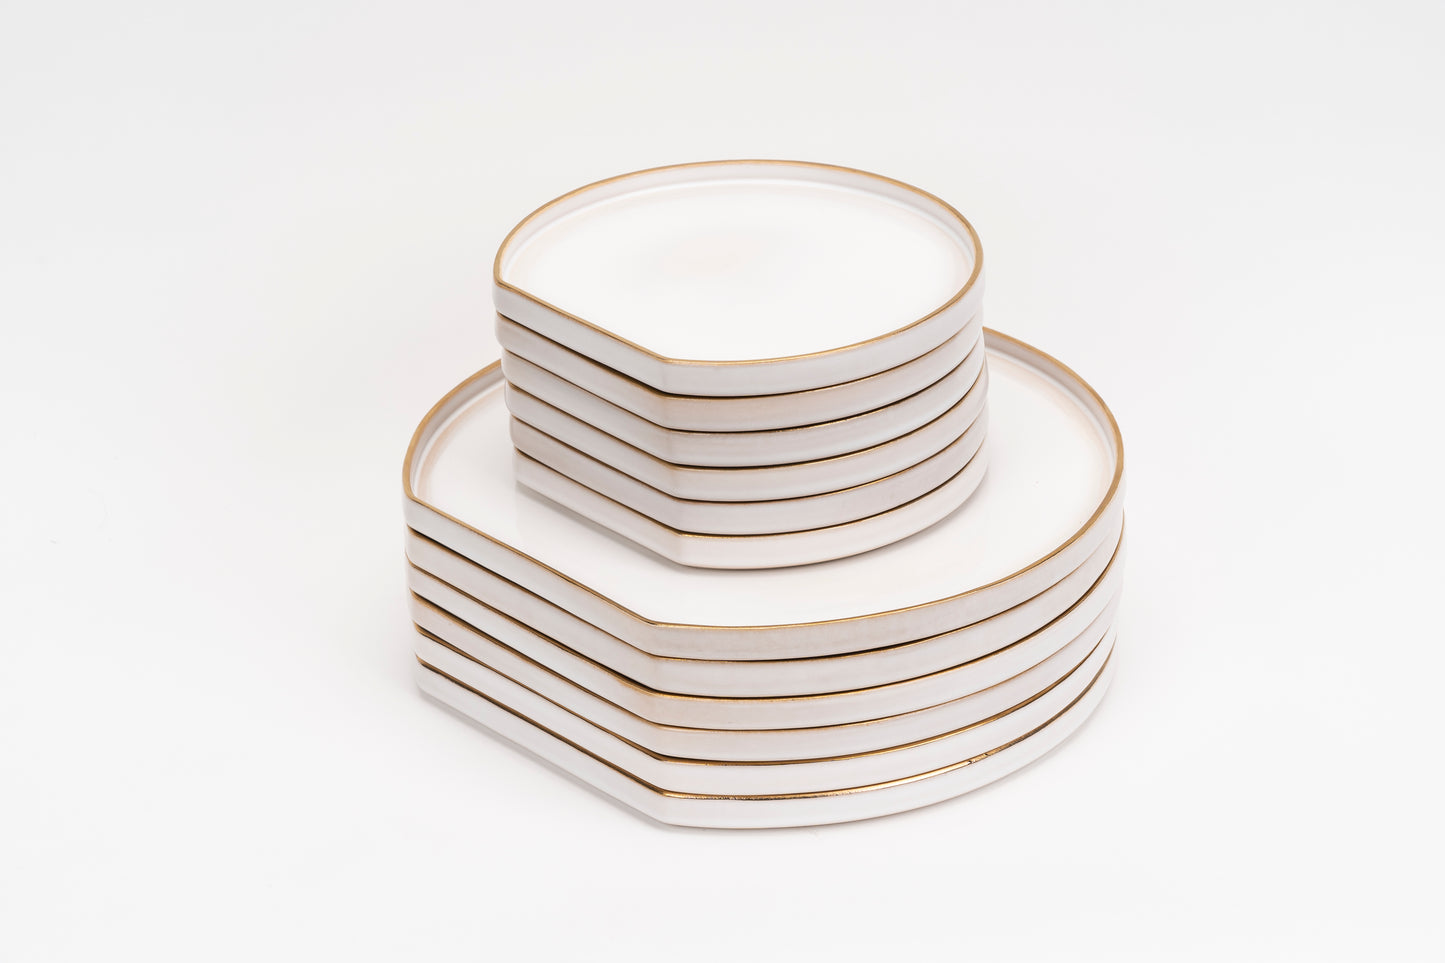 Ivory & Gold Plate Sets